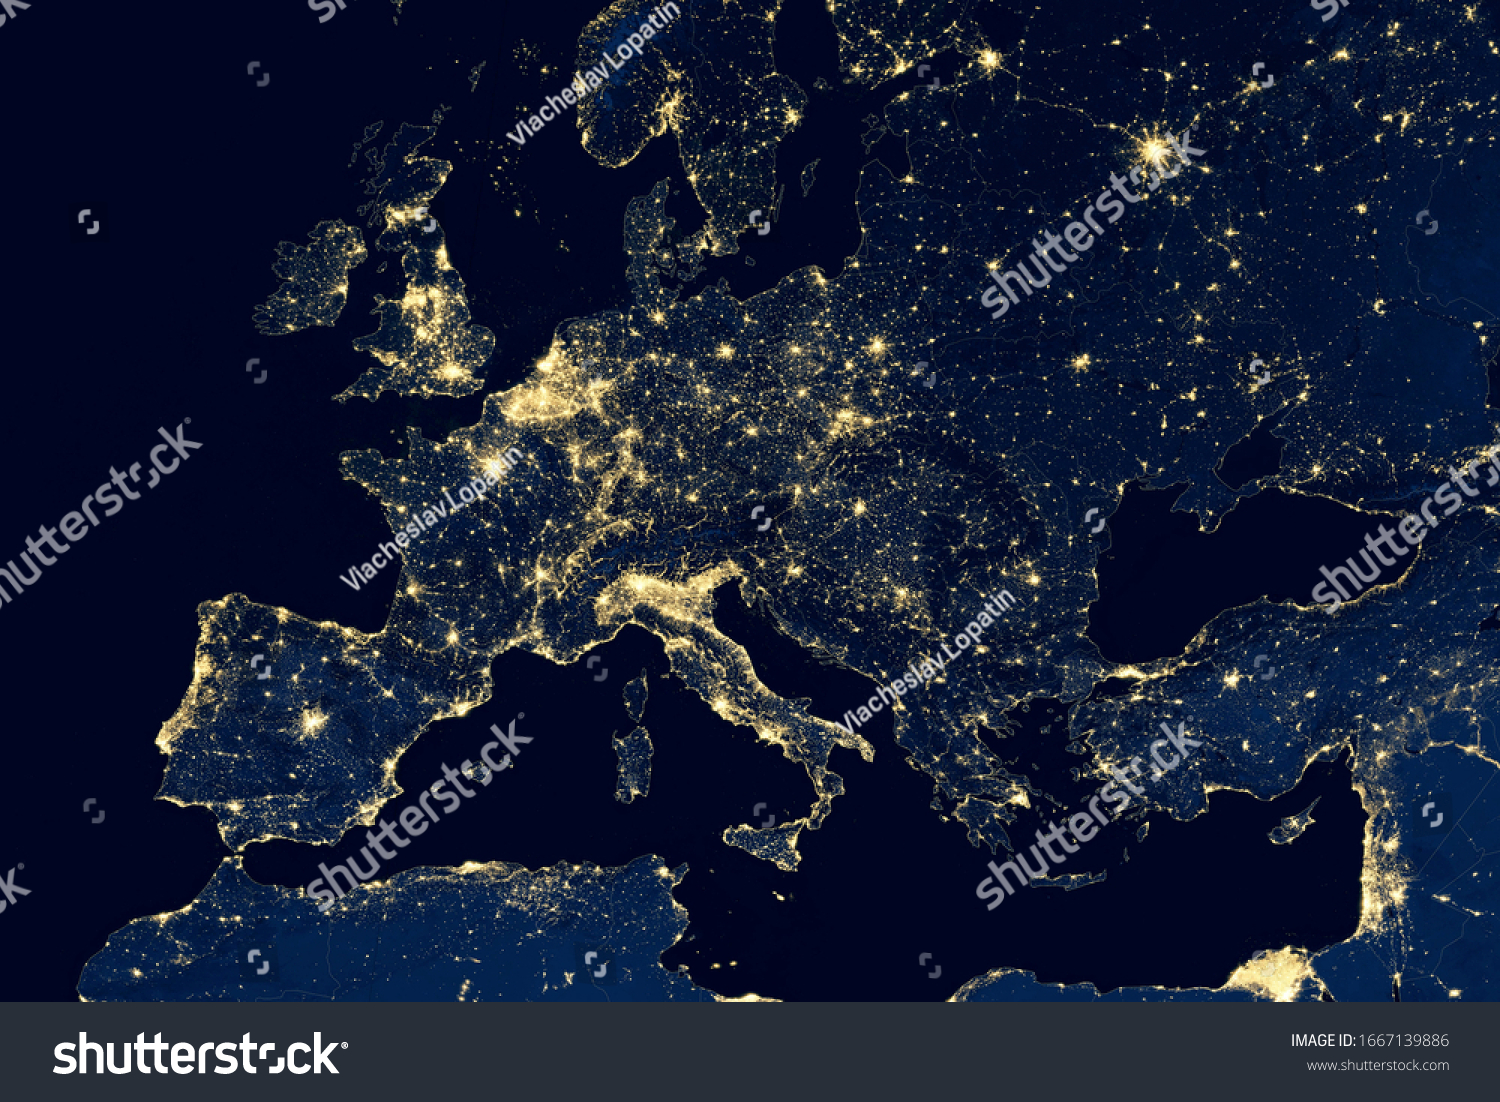 Europe map in global satellite picture, view of city lights on night Earth from space. EU, UK and Mediterranean, World part in orbit photo. Elements of this image furnished by NASA. #1667139886